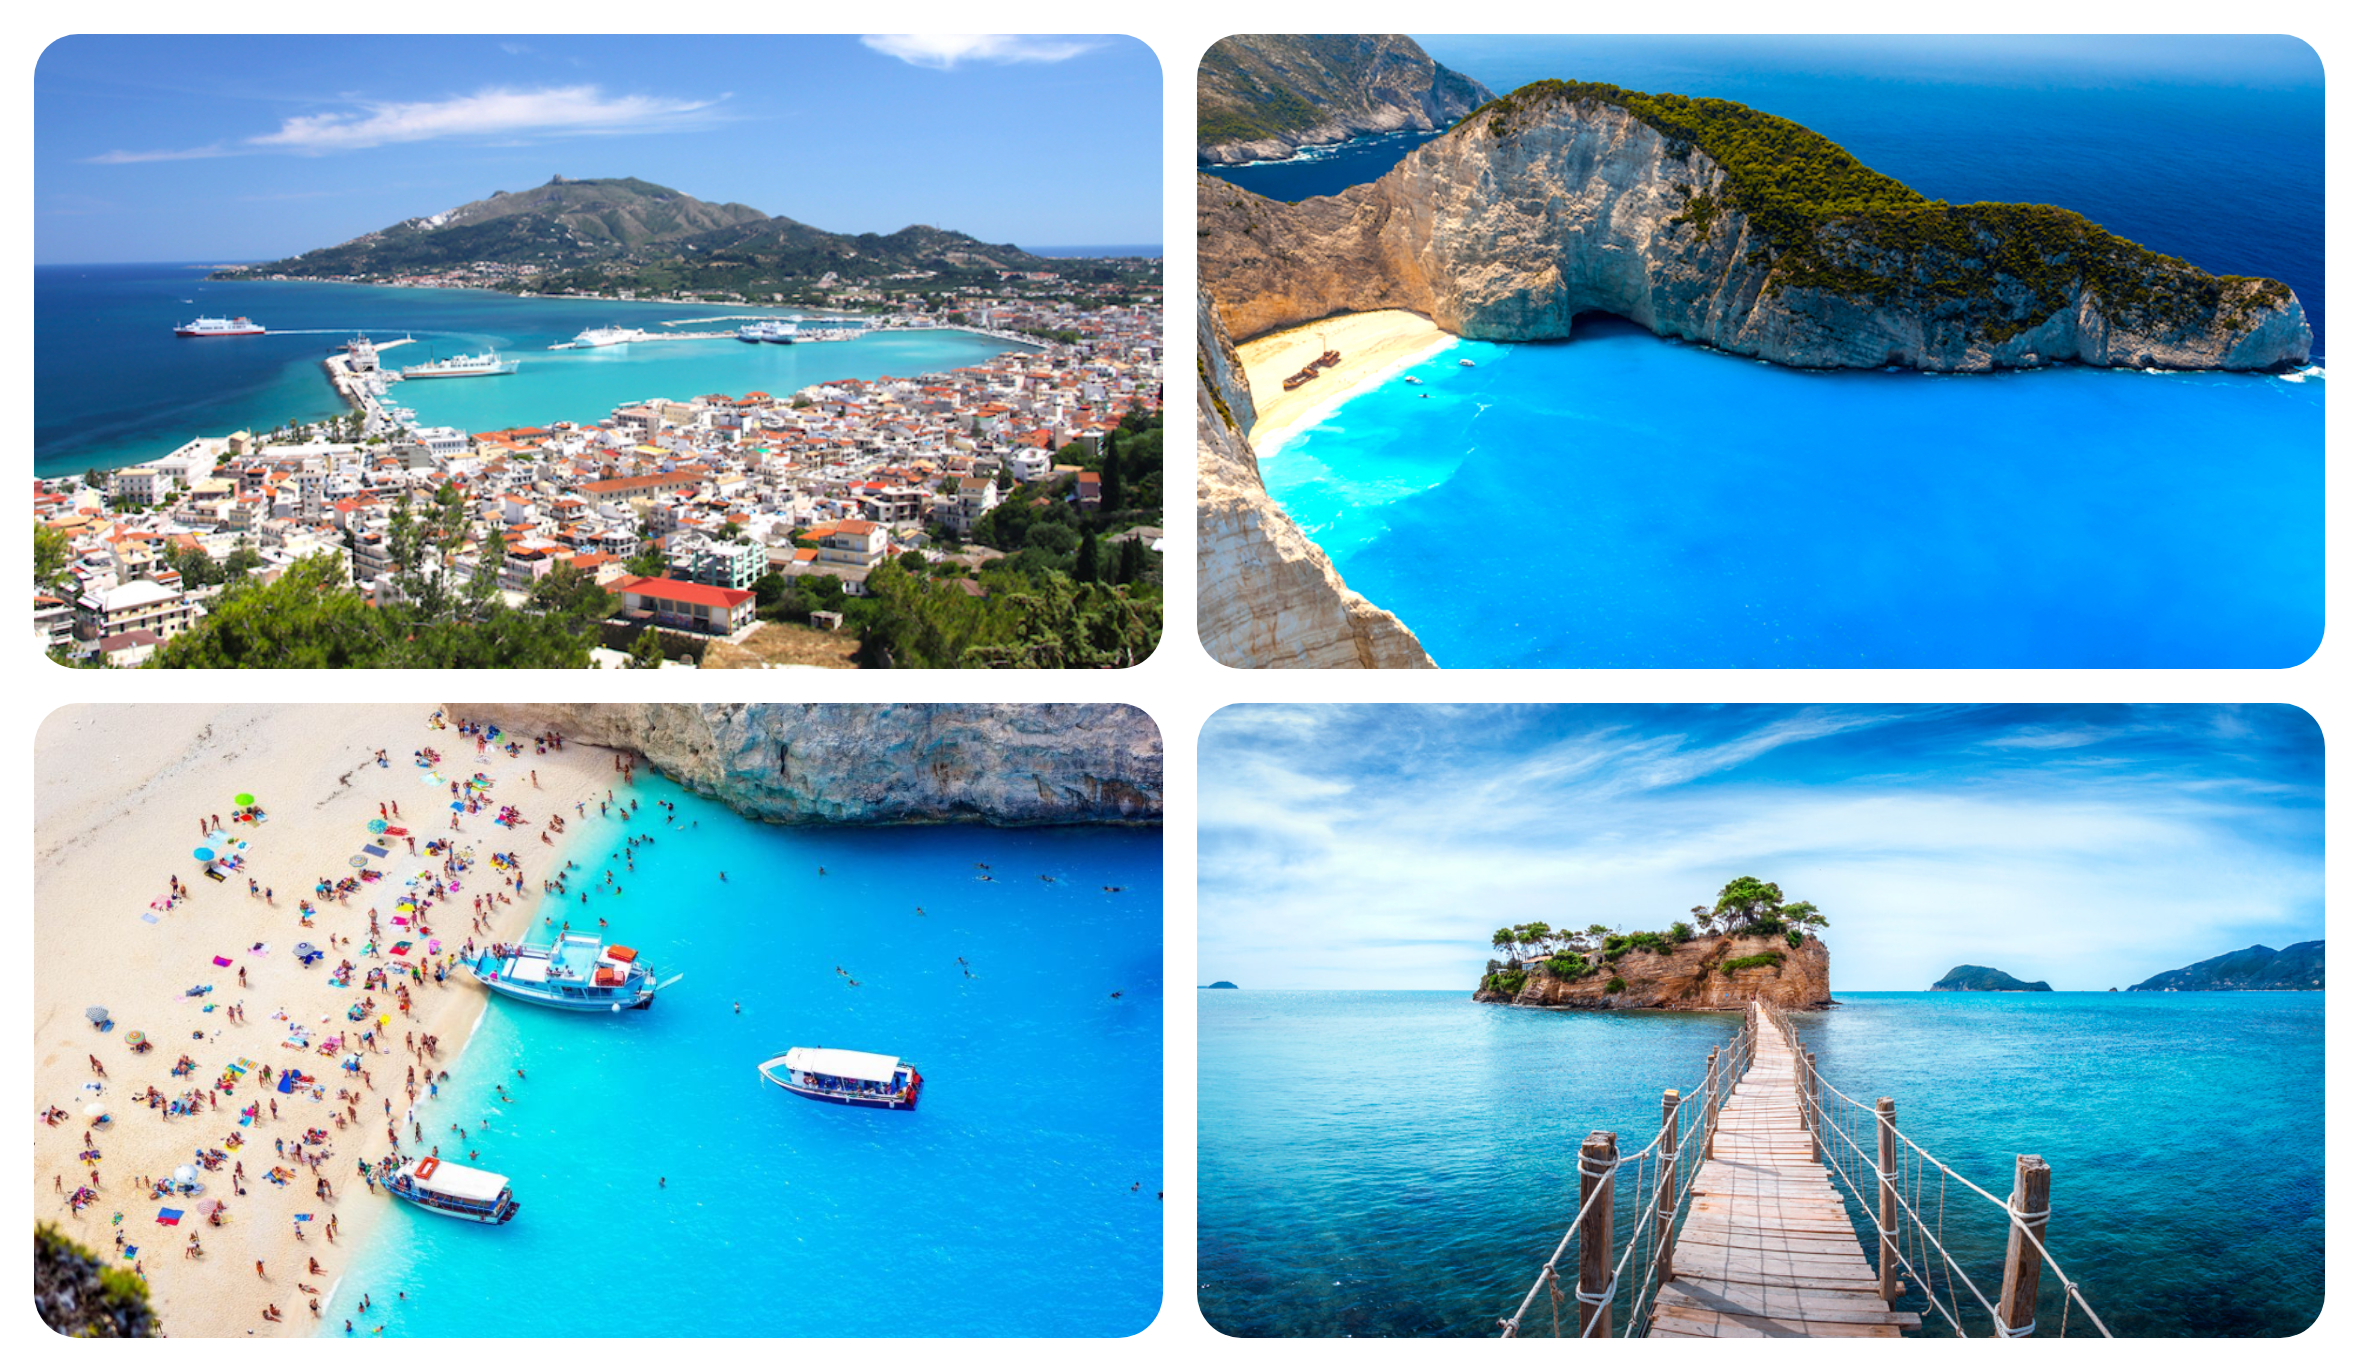 Top three things to do in Zakynthos - Travel and Hospitality Awards